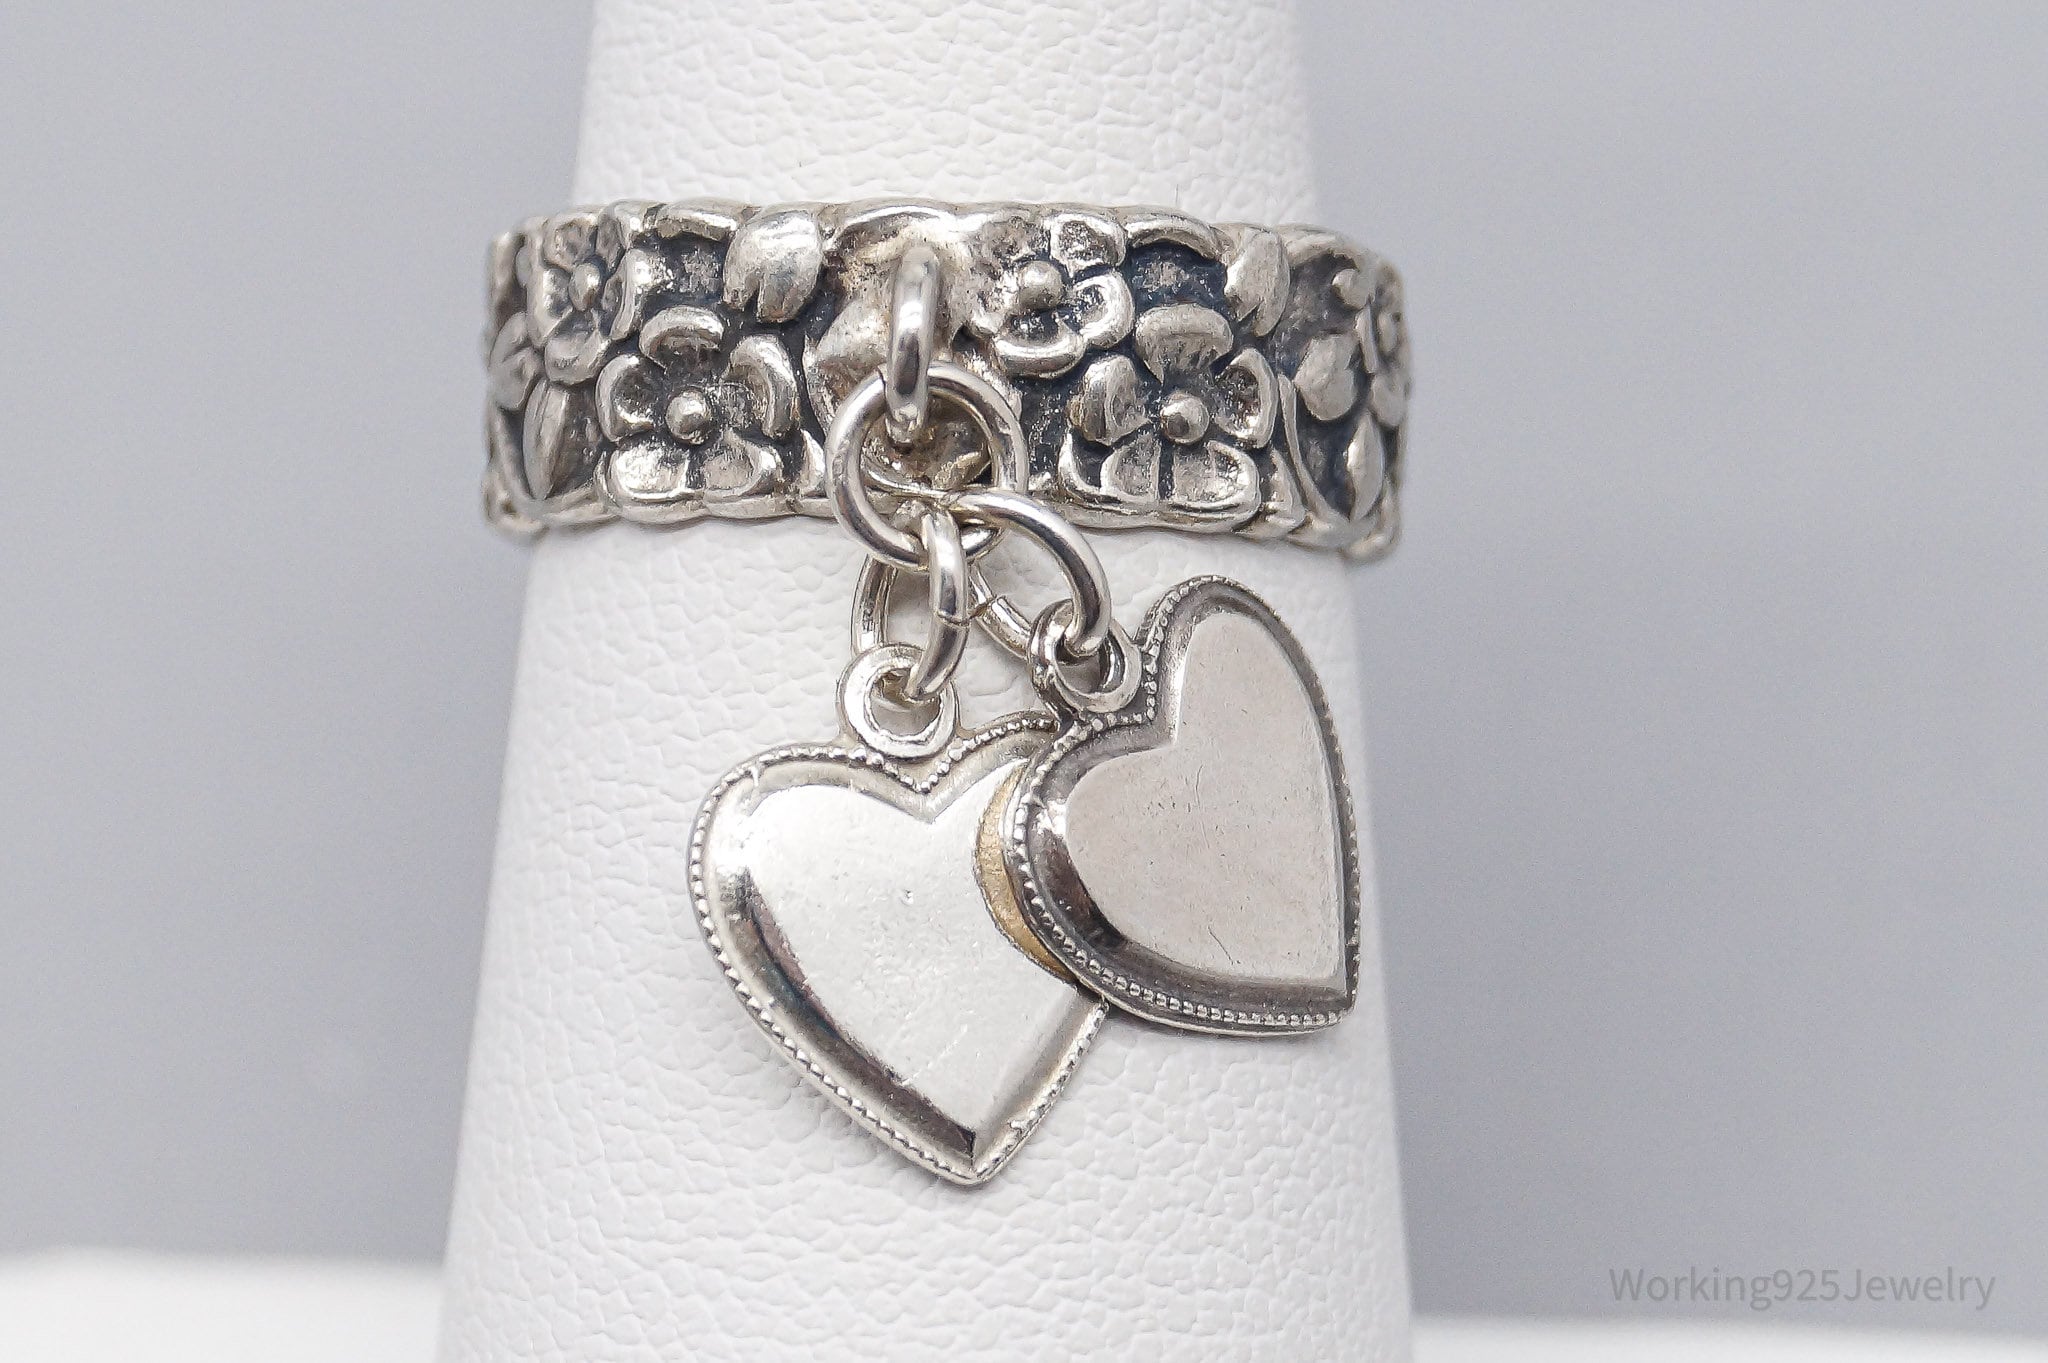 Antique Sweethearts Charms Flowers Pattern Sterling Silver Ring - Size 5.75